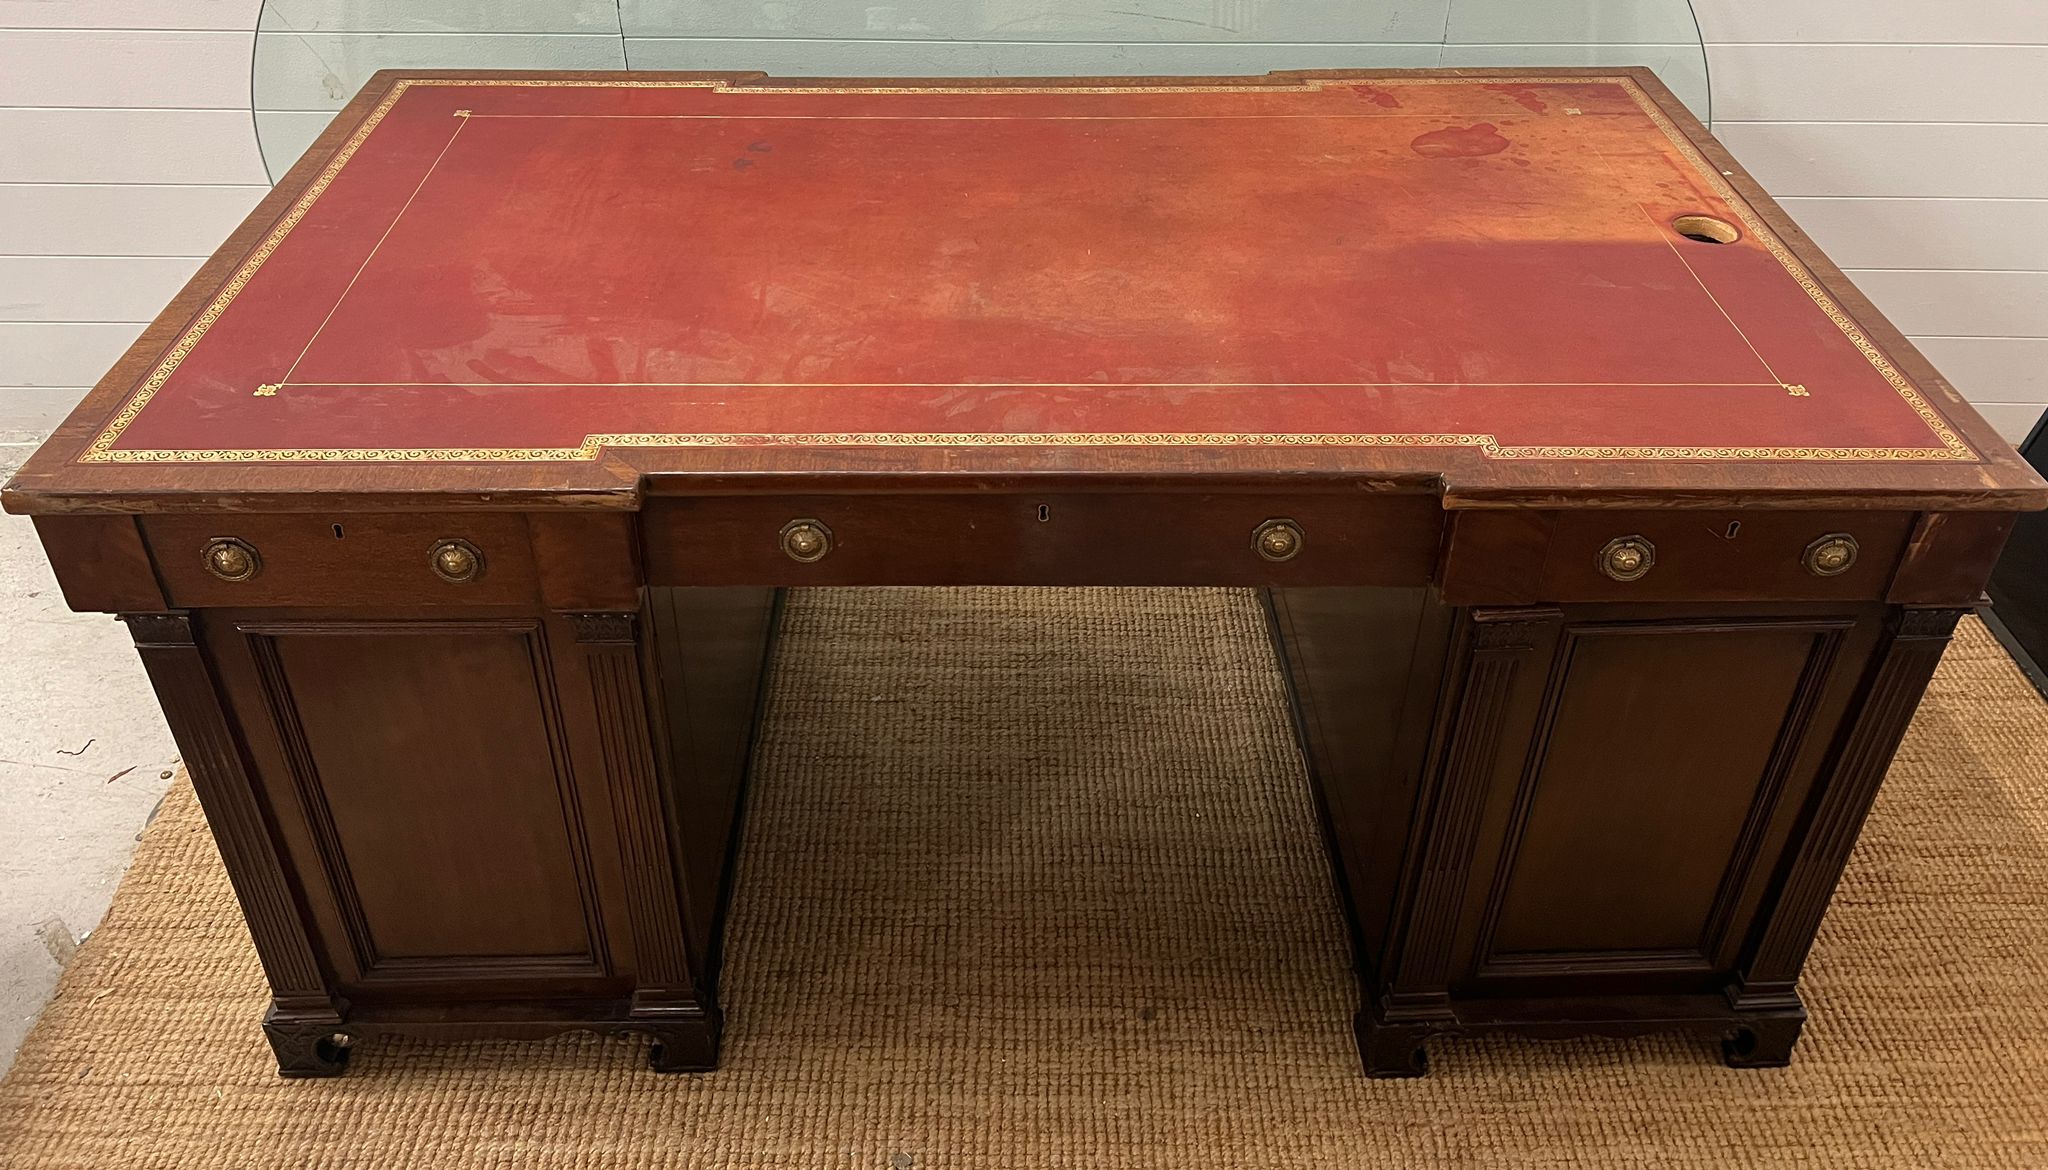 A early 20th Century double pedestal desk mahogany partners desk with a gold tooled red leather